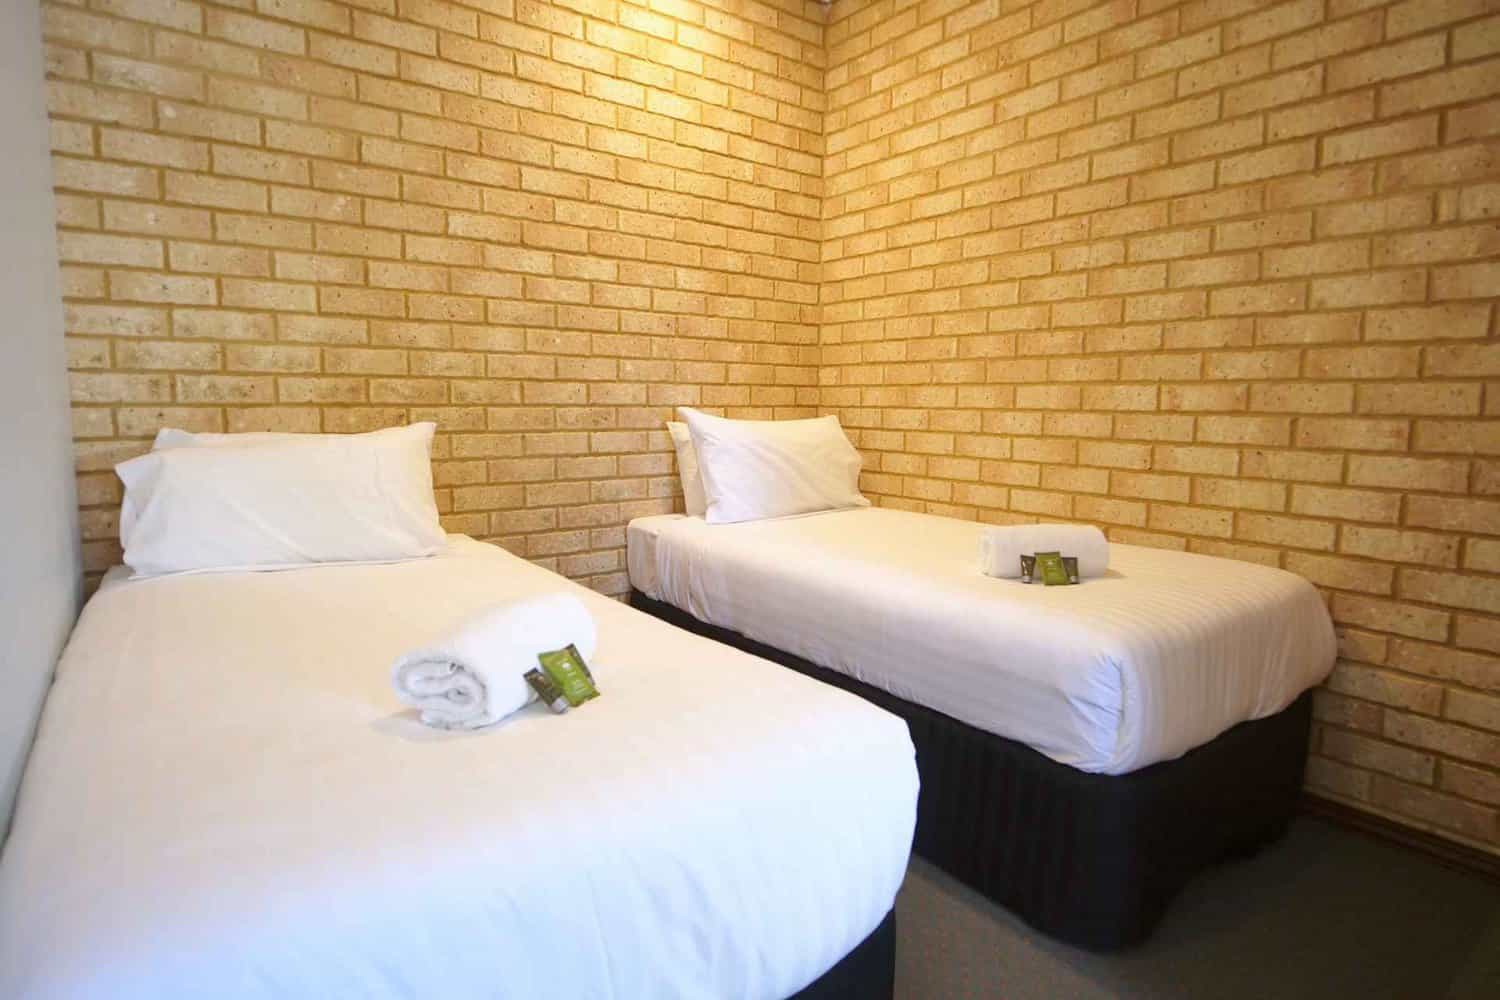 A simple and clean twin bedroom with two single beds set against a yellow brick wall. Each bed is neatly made with white linens and a rolled white towel at the foot. Small green packets, possibly toiletries, are placed on each bed, contributing to a welcoming atmosphere for guests.